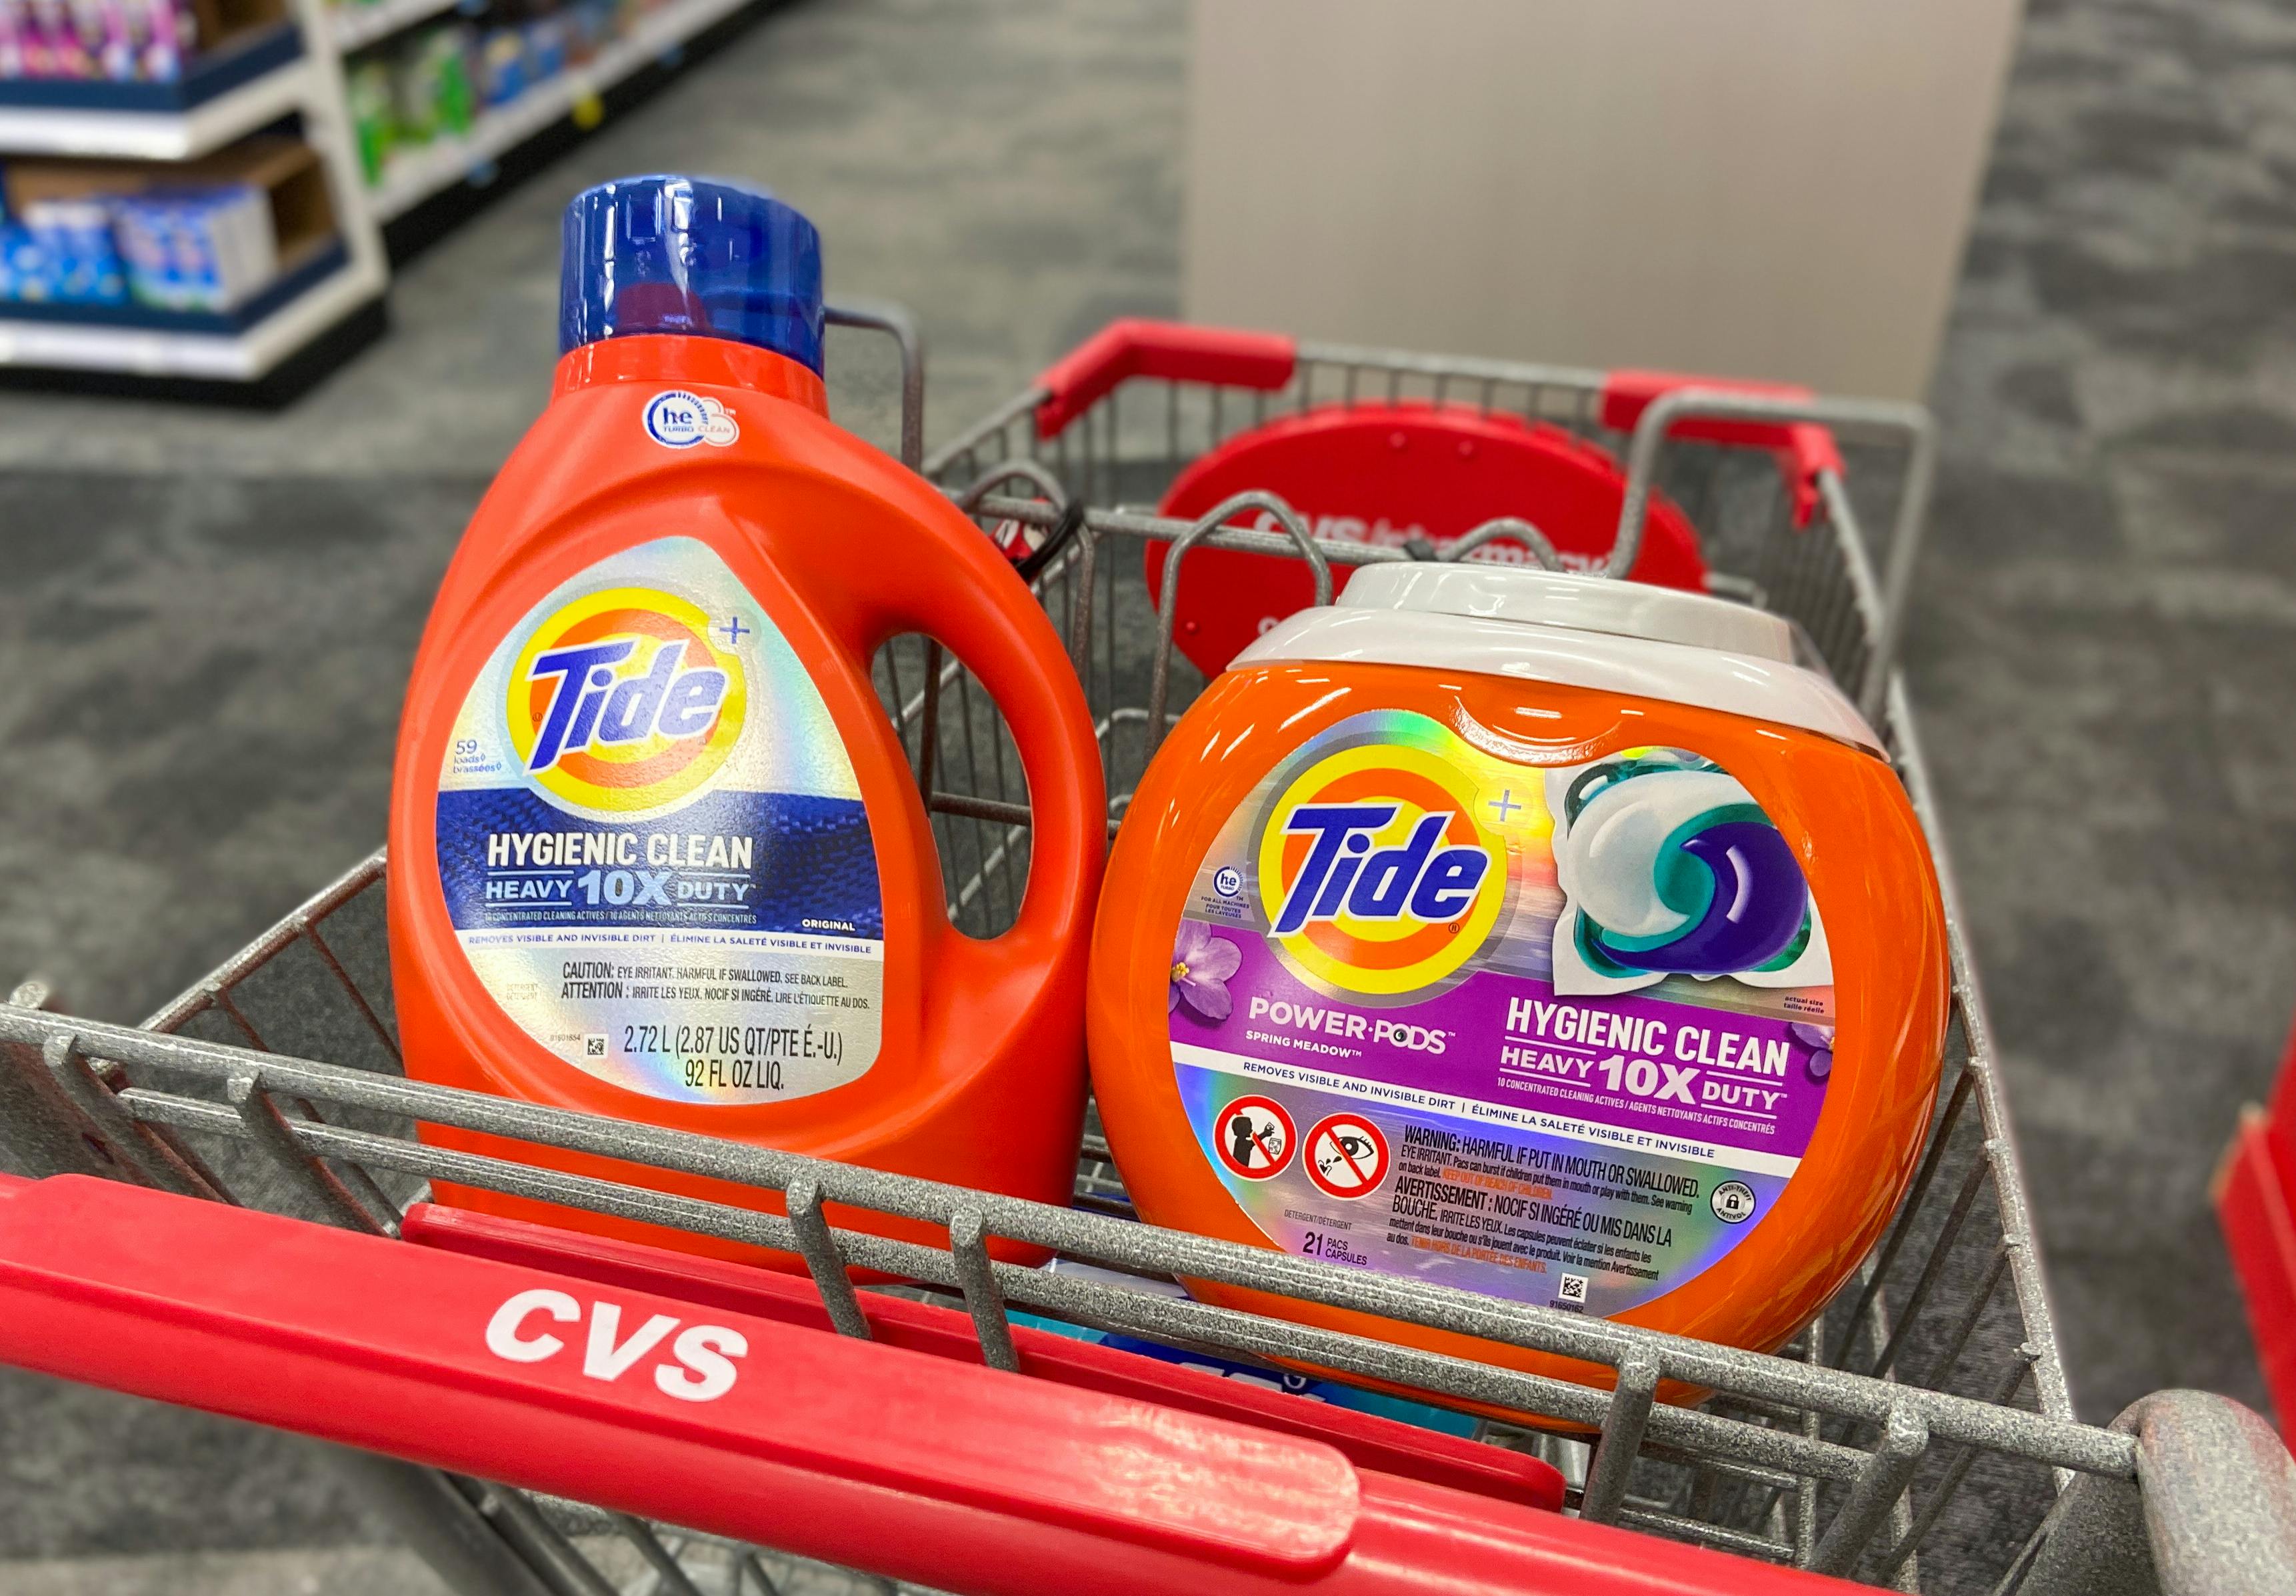 tide-downy-laundry-care-3-23-each-at-cvs-p-g-rebate-deal-the